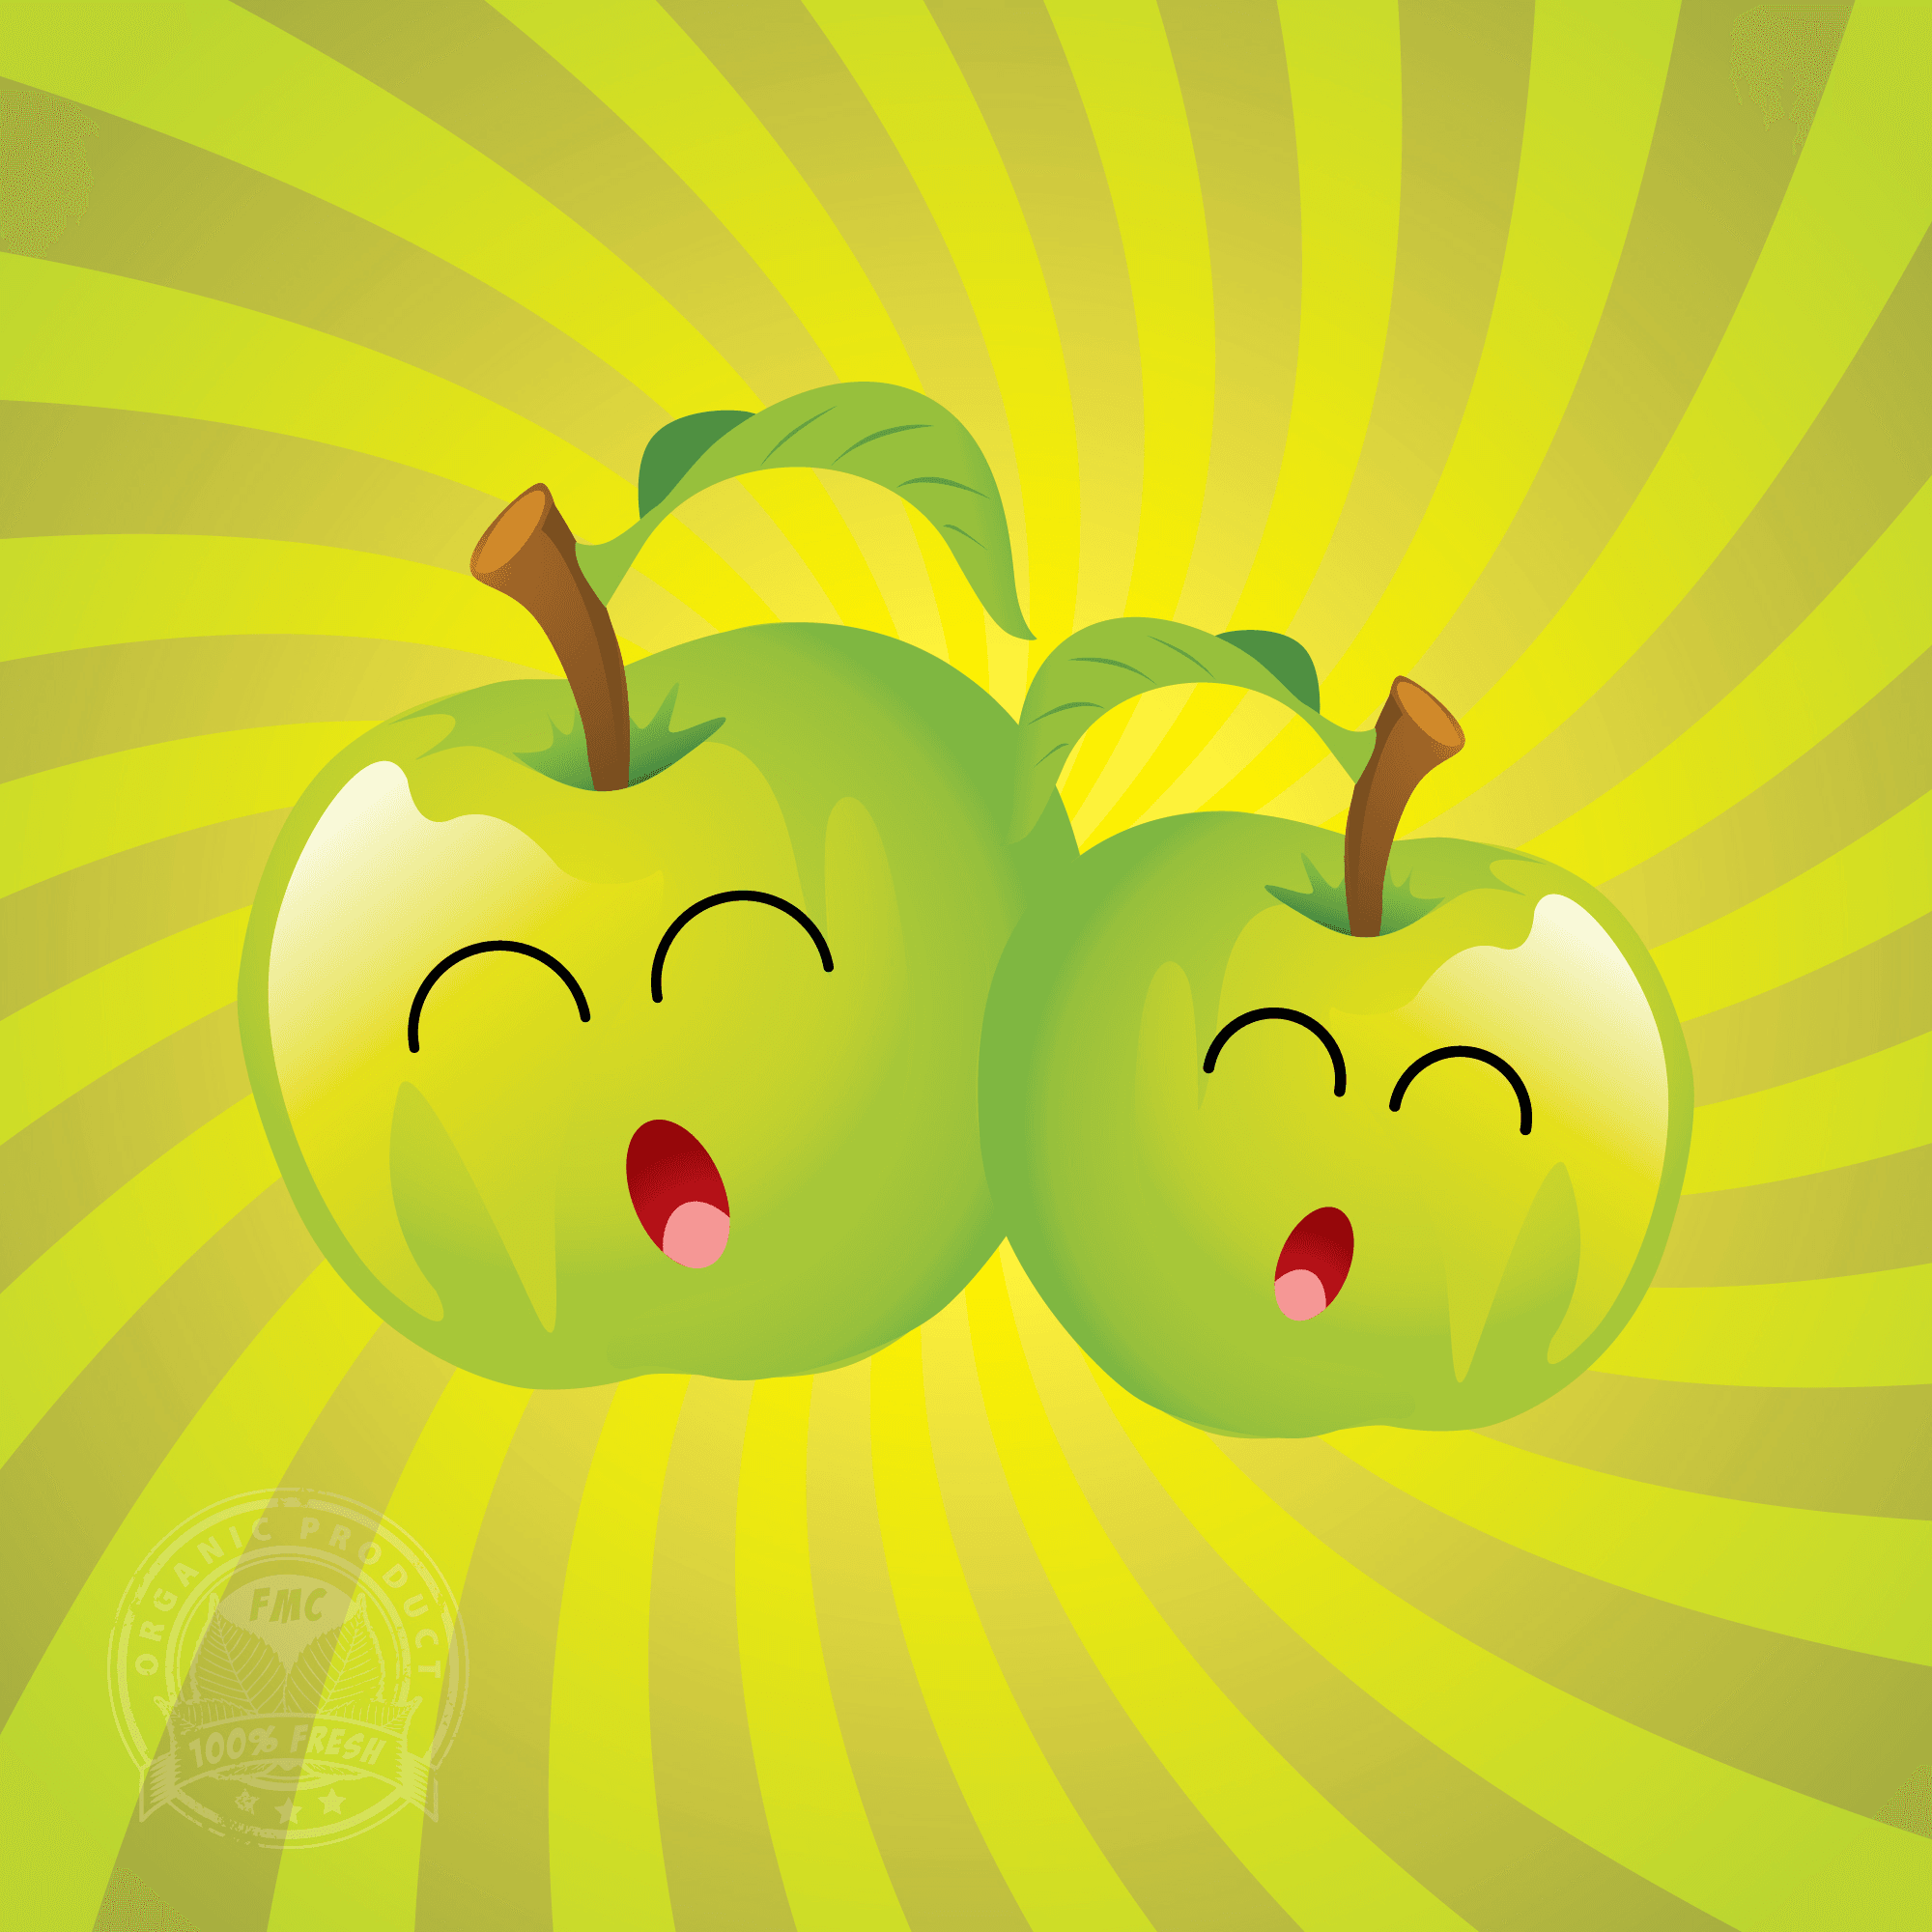 The Green Apples #001